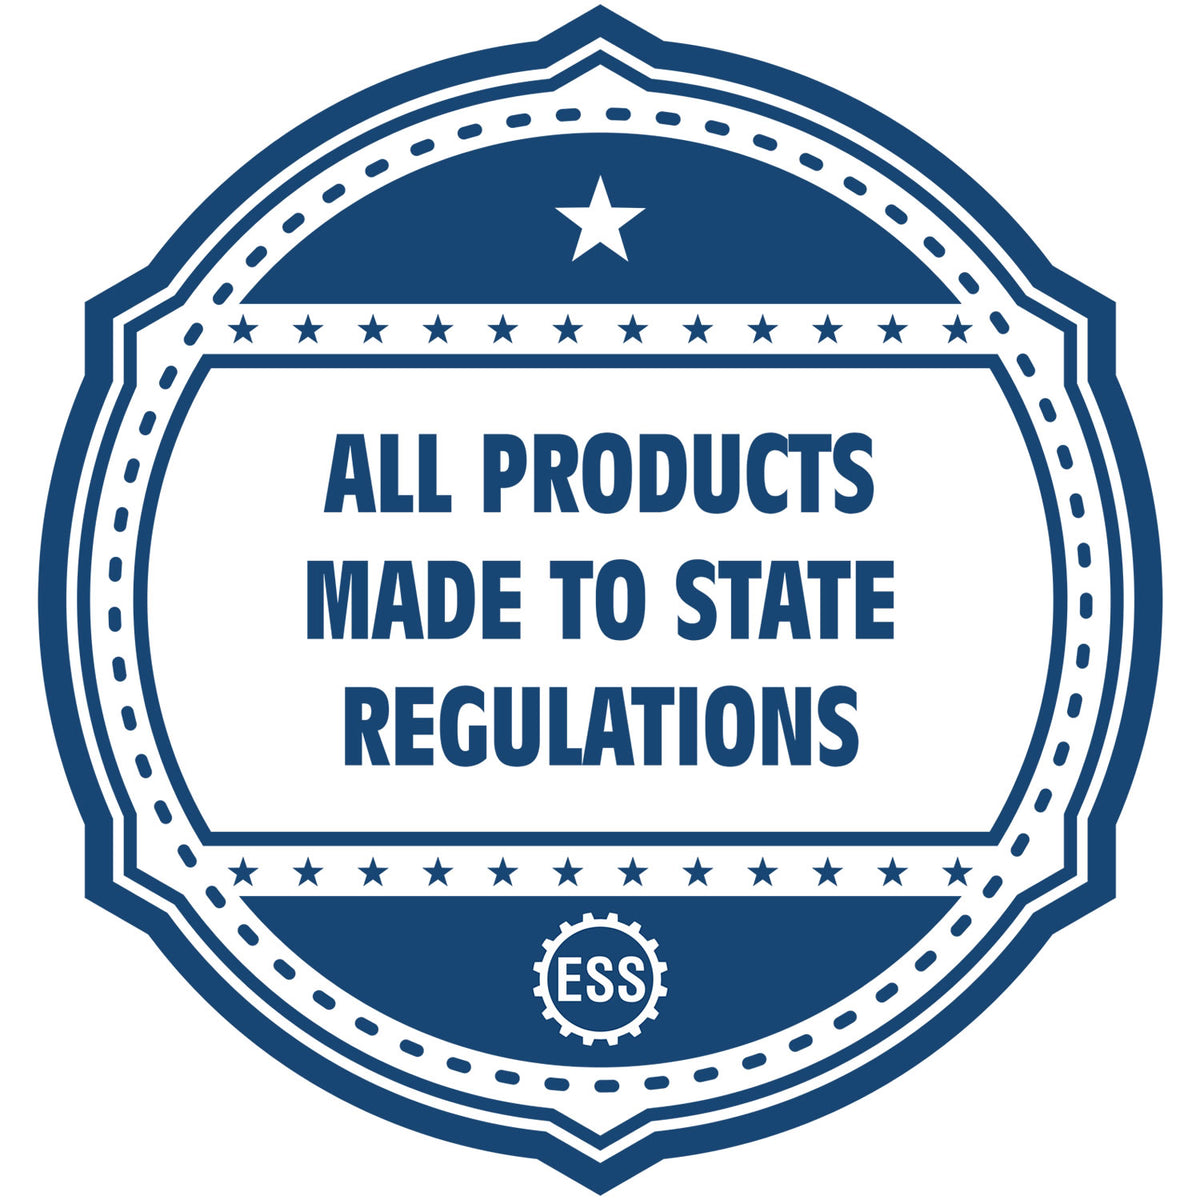 A blue icon or badge for the Hybrid Texas Architect Seal showing that this product is made in compliance with state regulations.